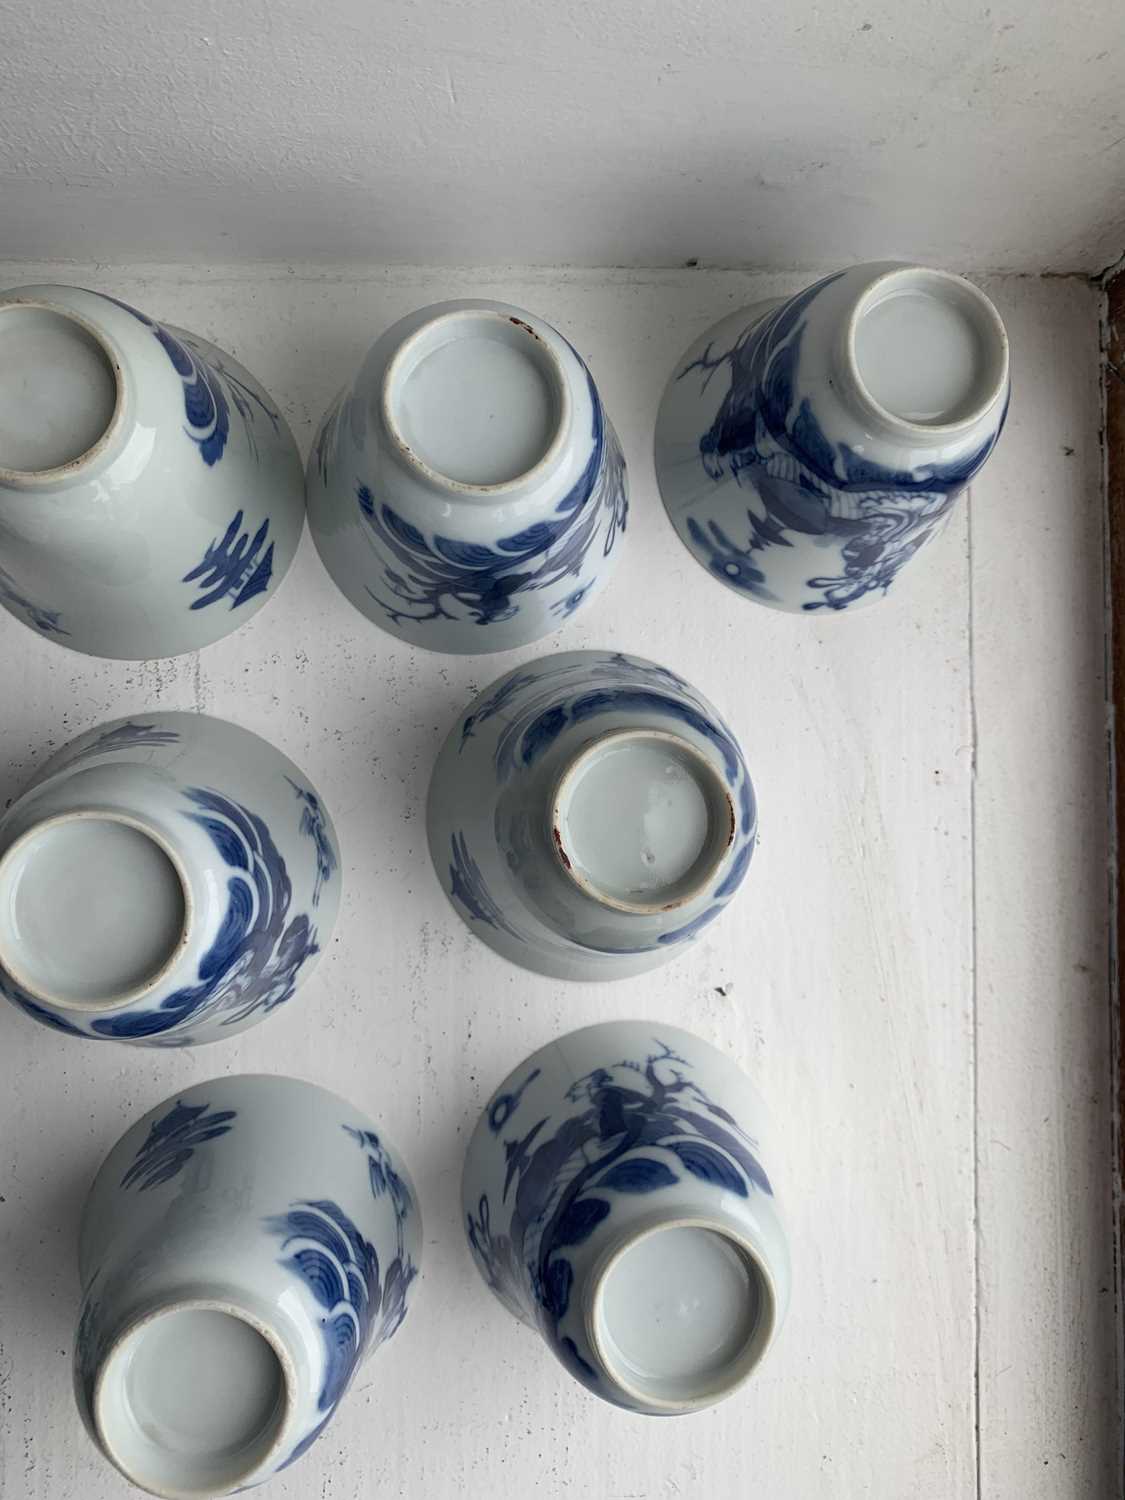 A set of Chinese blue and white porcelain cups, covers and stands, 18th century. - Image 31 of 41